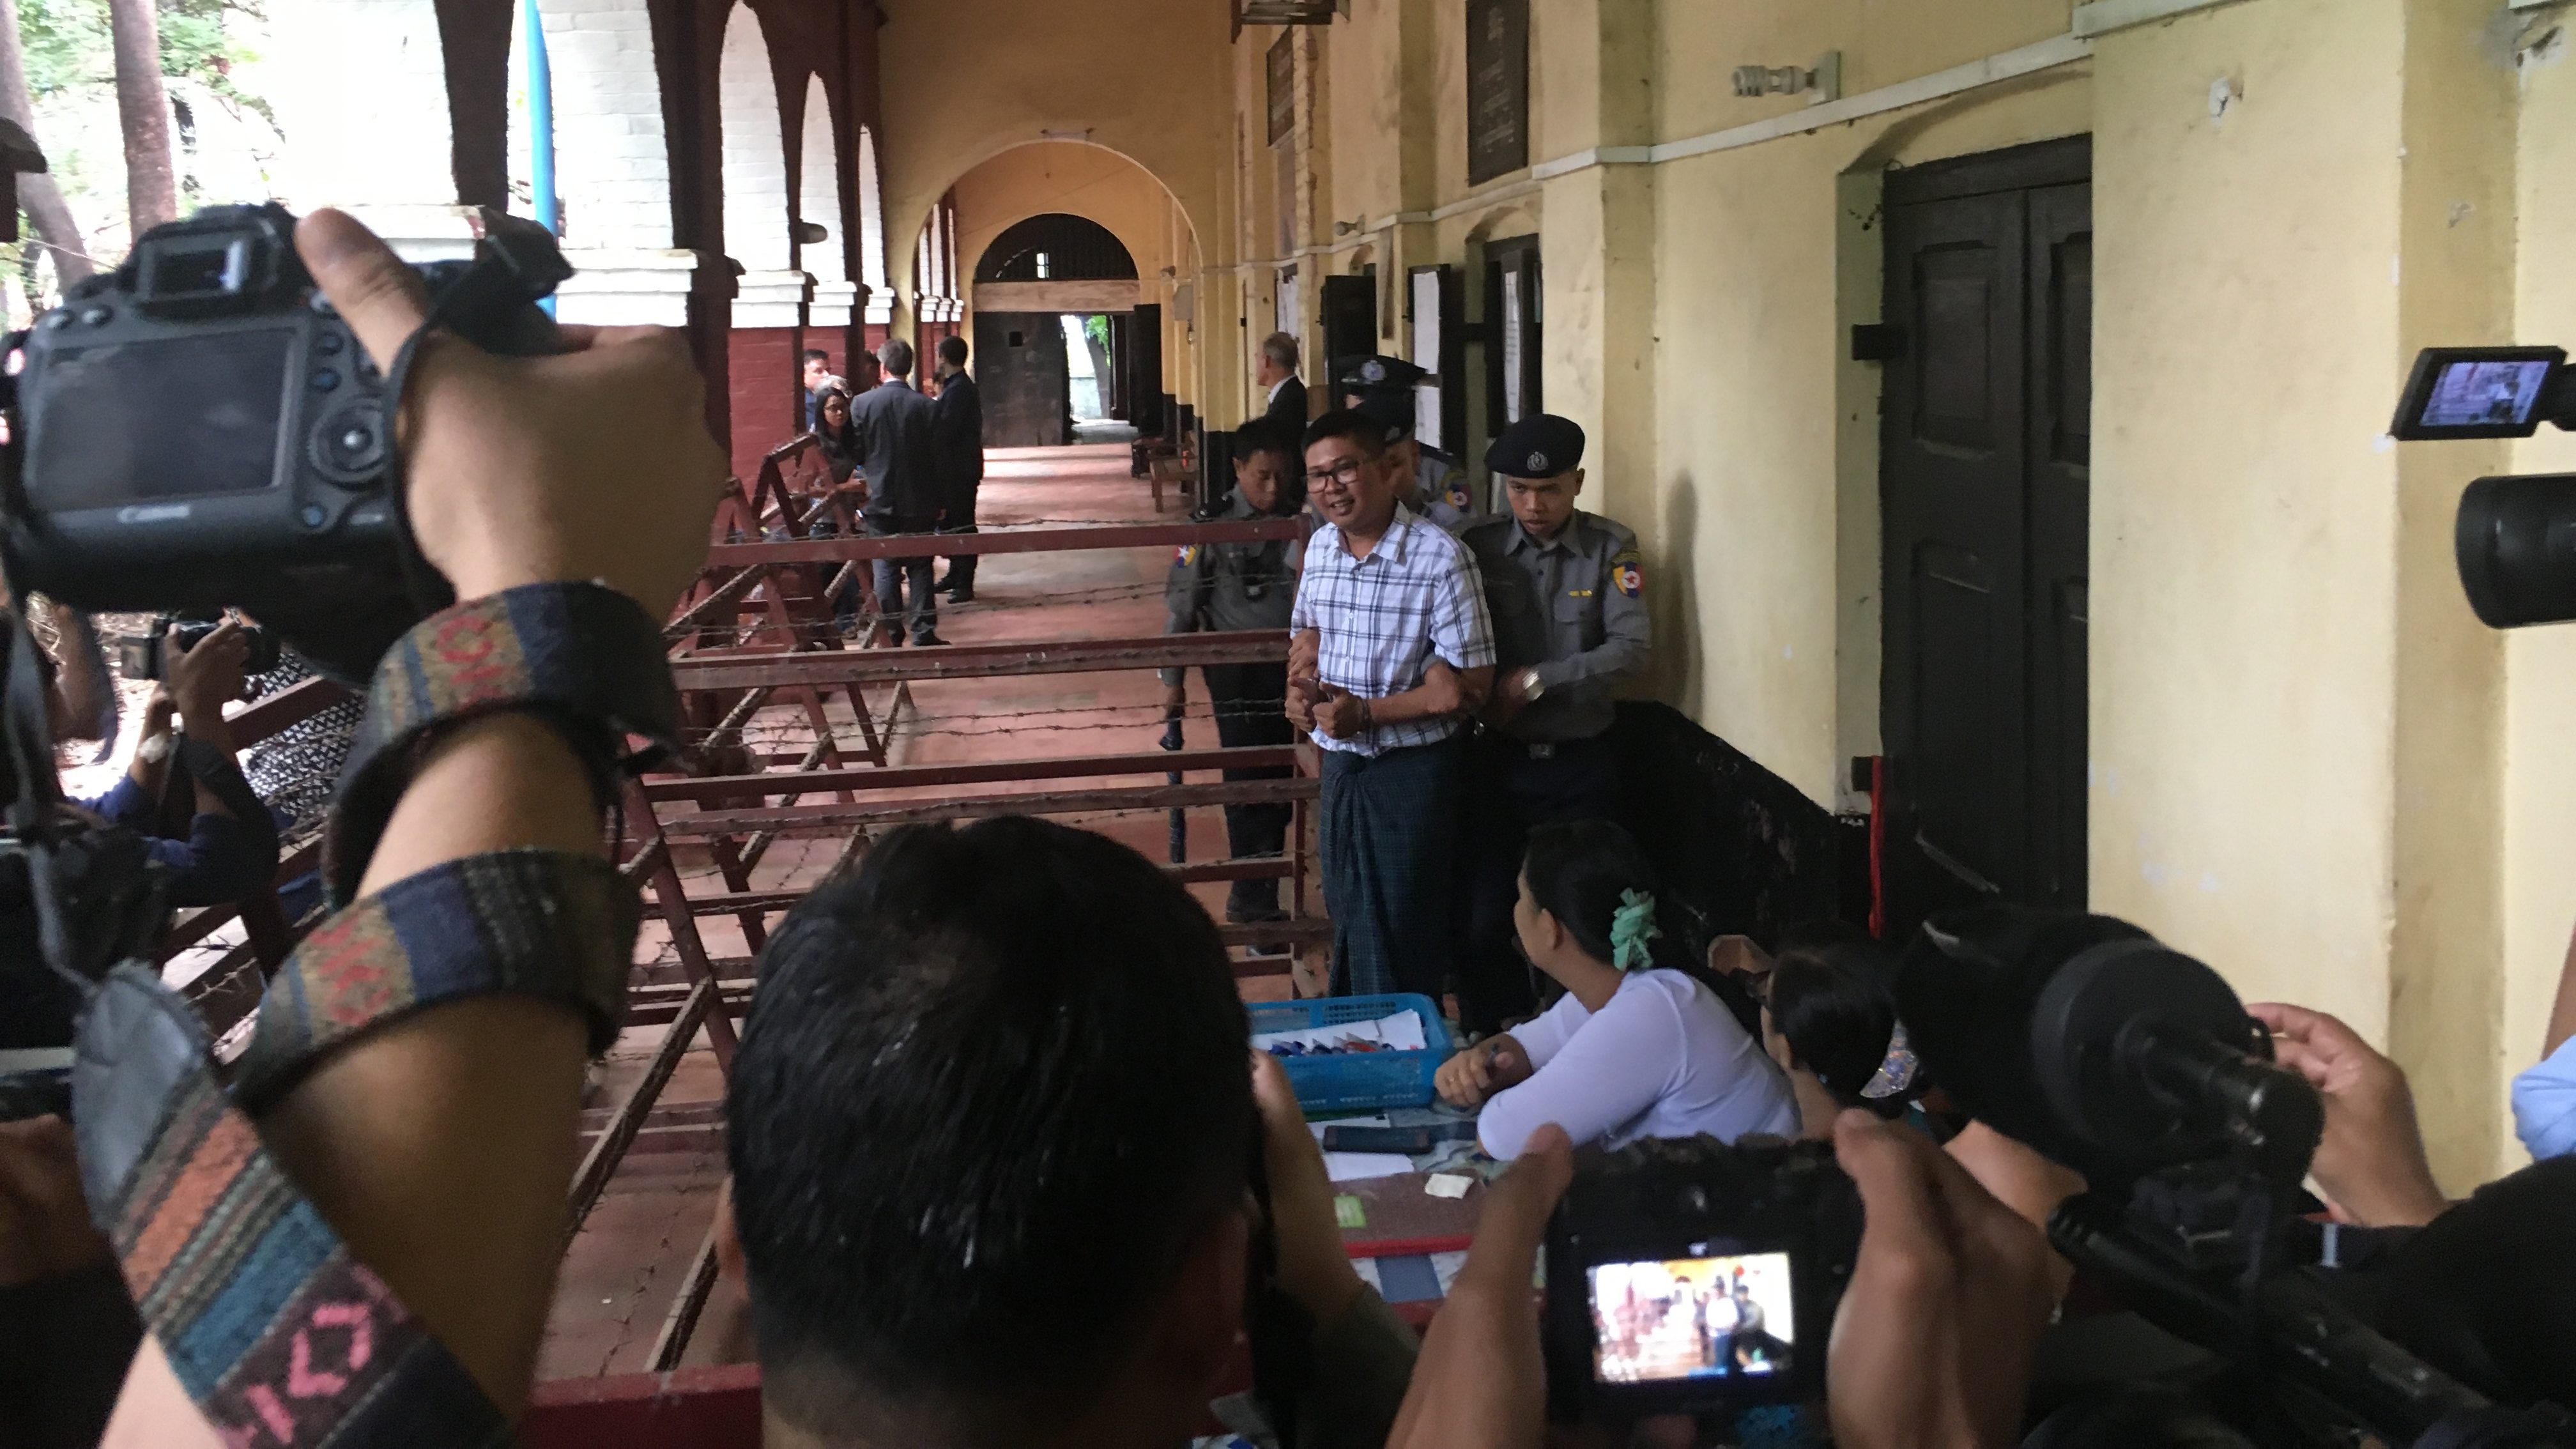 Reuters reporter Wa Lone is escorted from the Insein Township courthouse after testifying on July 16, 2018. His testimony continued on July 17. Photo: Jacob Goldberg